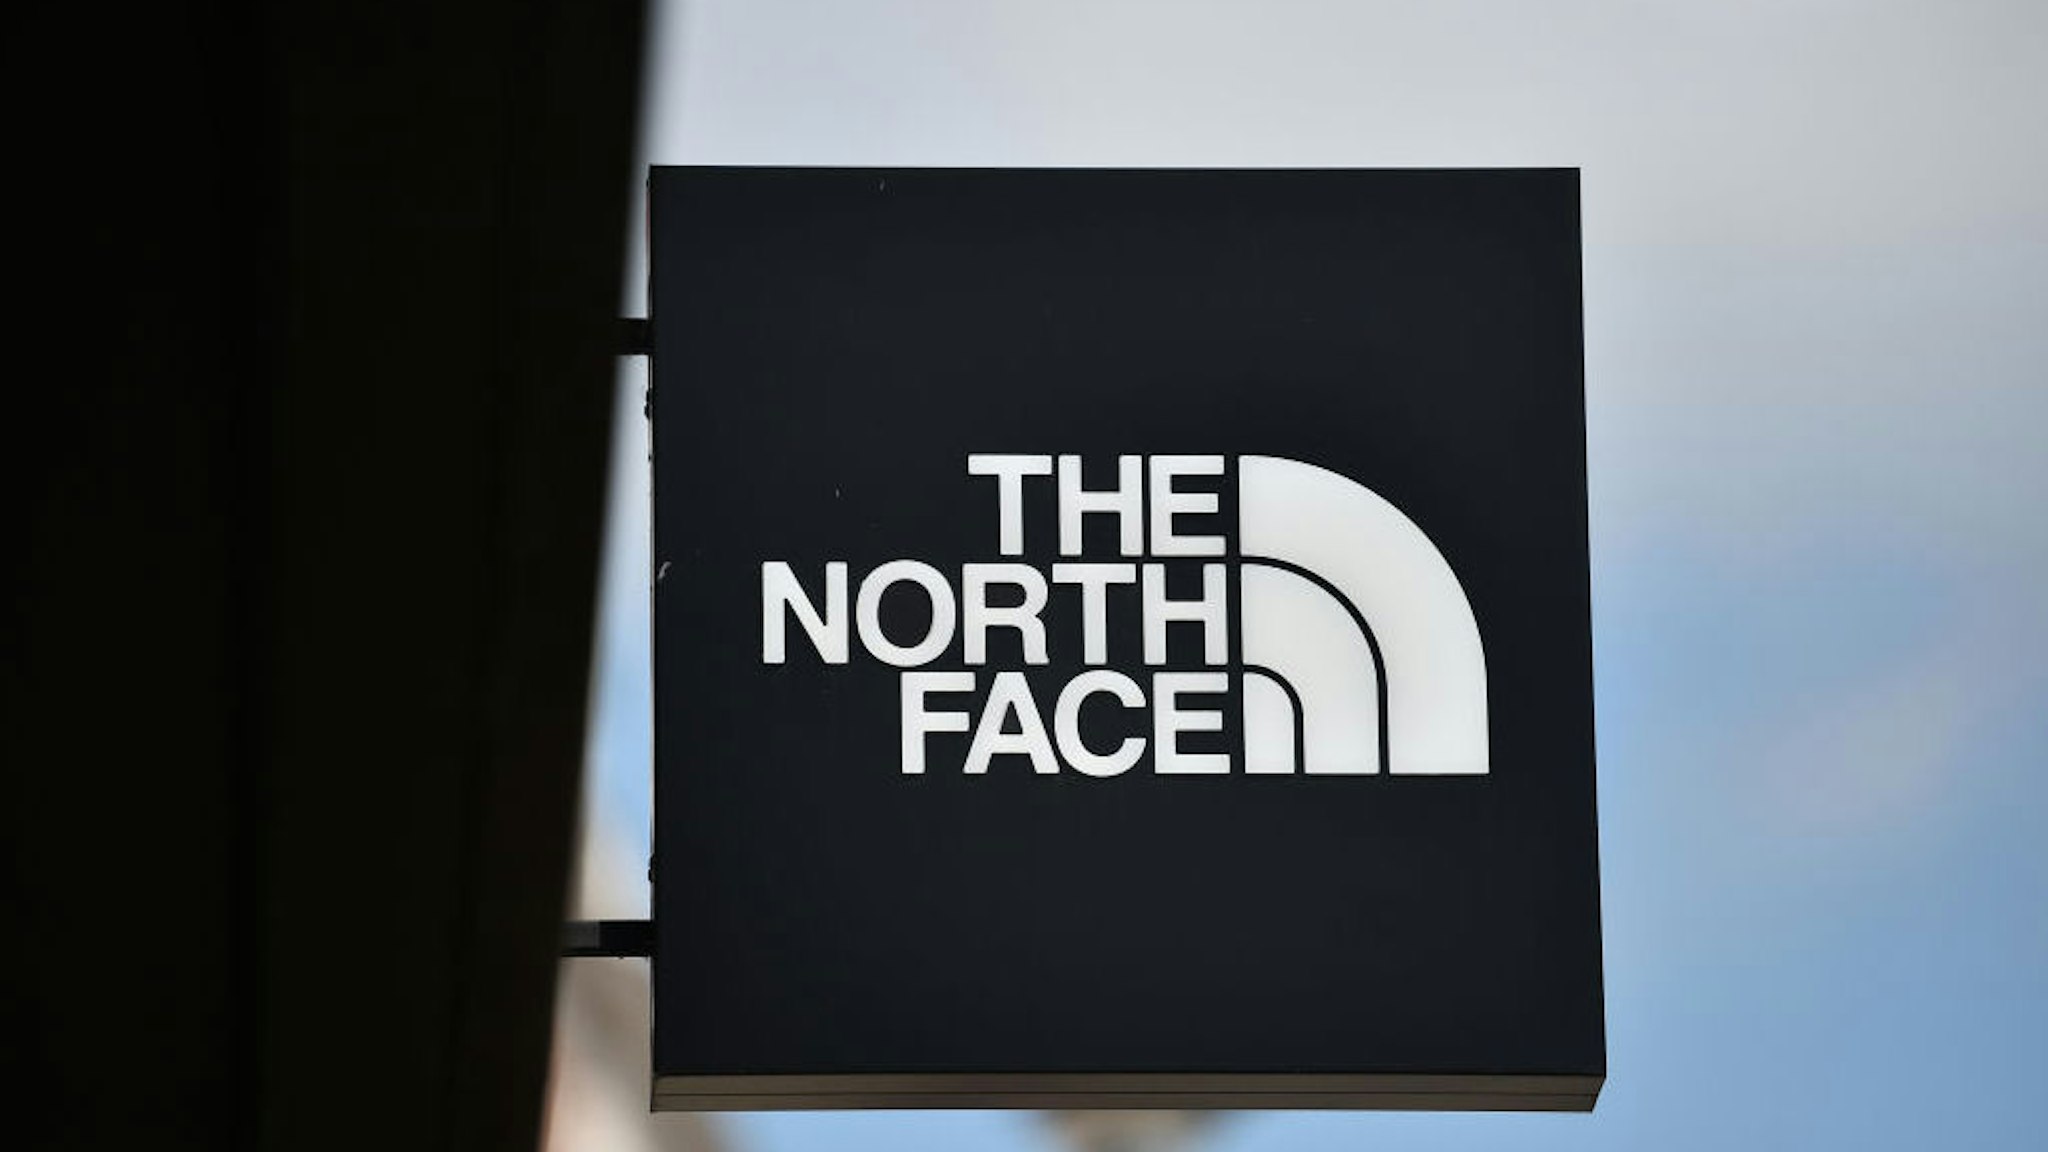 LEEDS, ENGLAND - MAY 27: The North Face logo is displayed outside one of its stores on May 27, 2021 in Leeds, England. (Photo by Nathan Stirk/Getty Images)